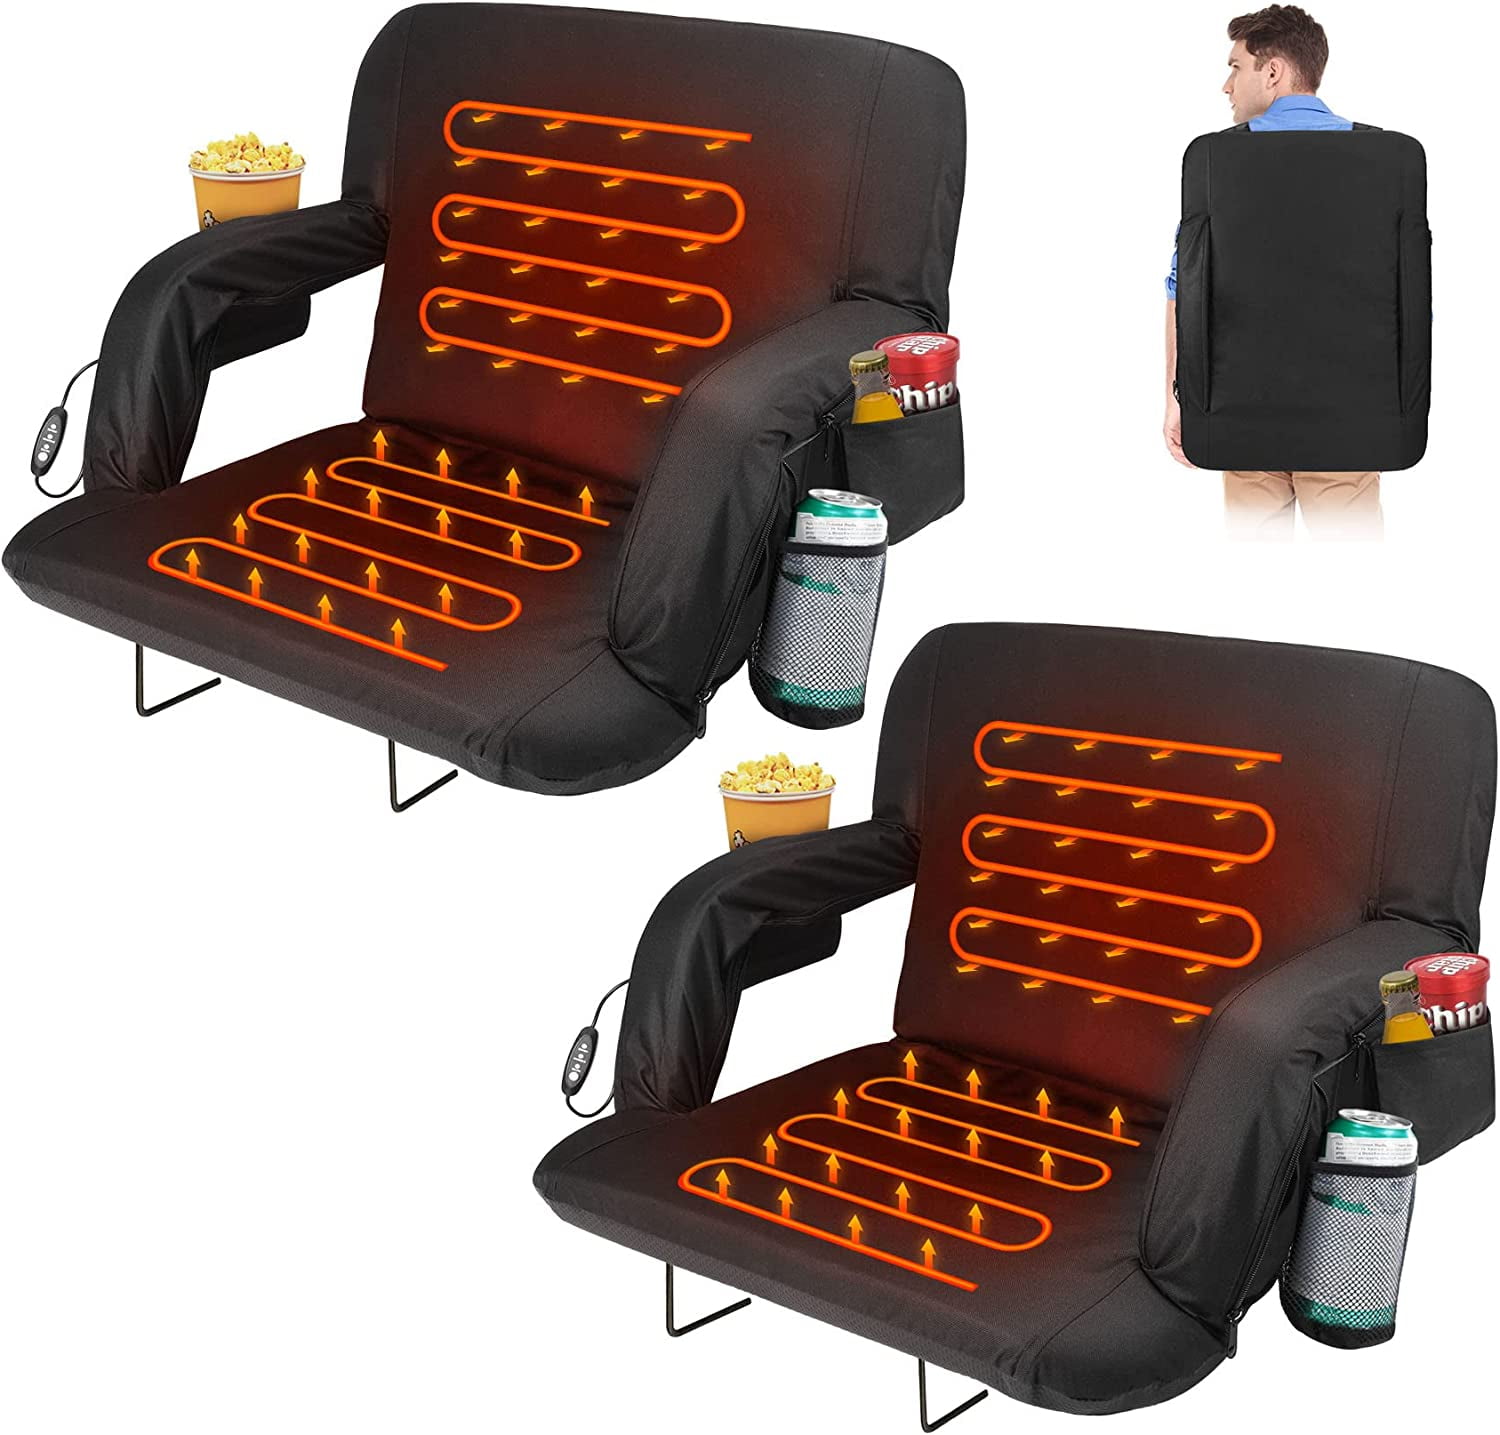 Cozybox 2-Pack of Stadium Seat for Bleachers with Padded Cushion Foldable Stadium Chairs with Strap and Cup Holder, Adult Unisex, Size: 2-Chairs